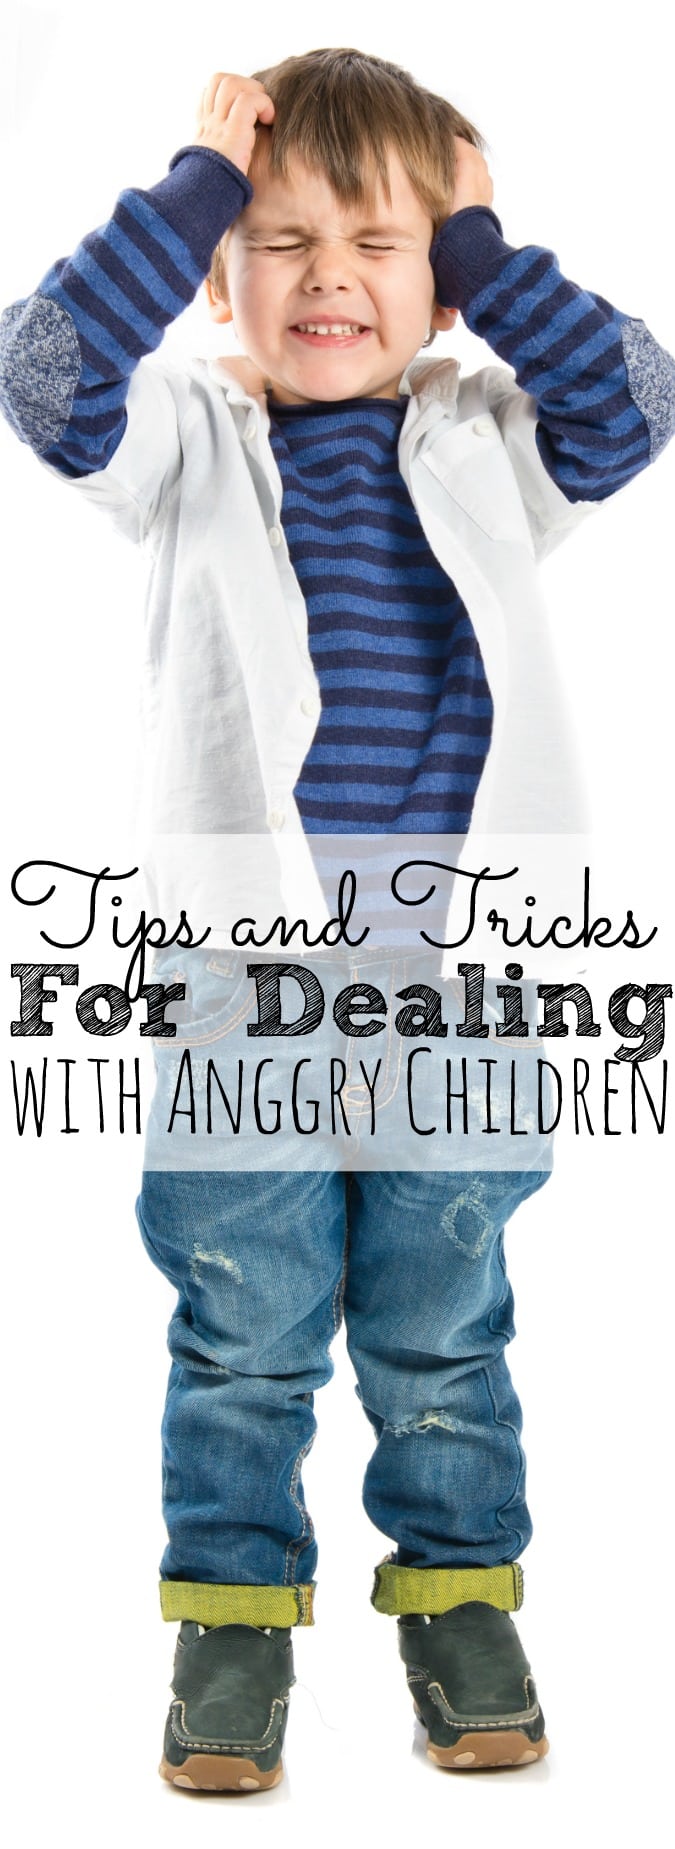 Tips For Dealing With Angry Children - simplytodaylife.com